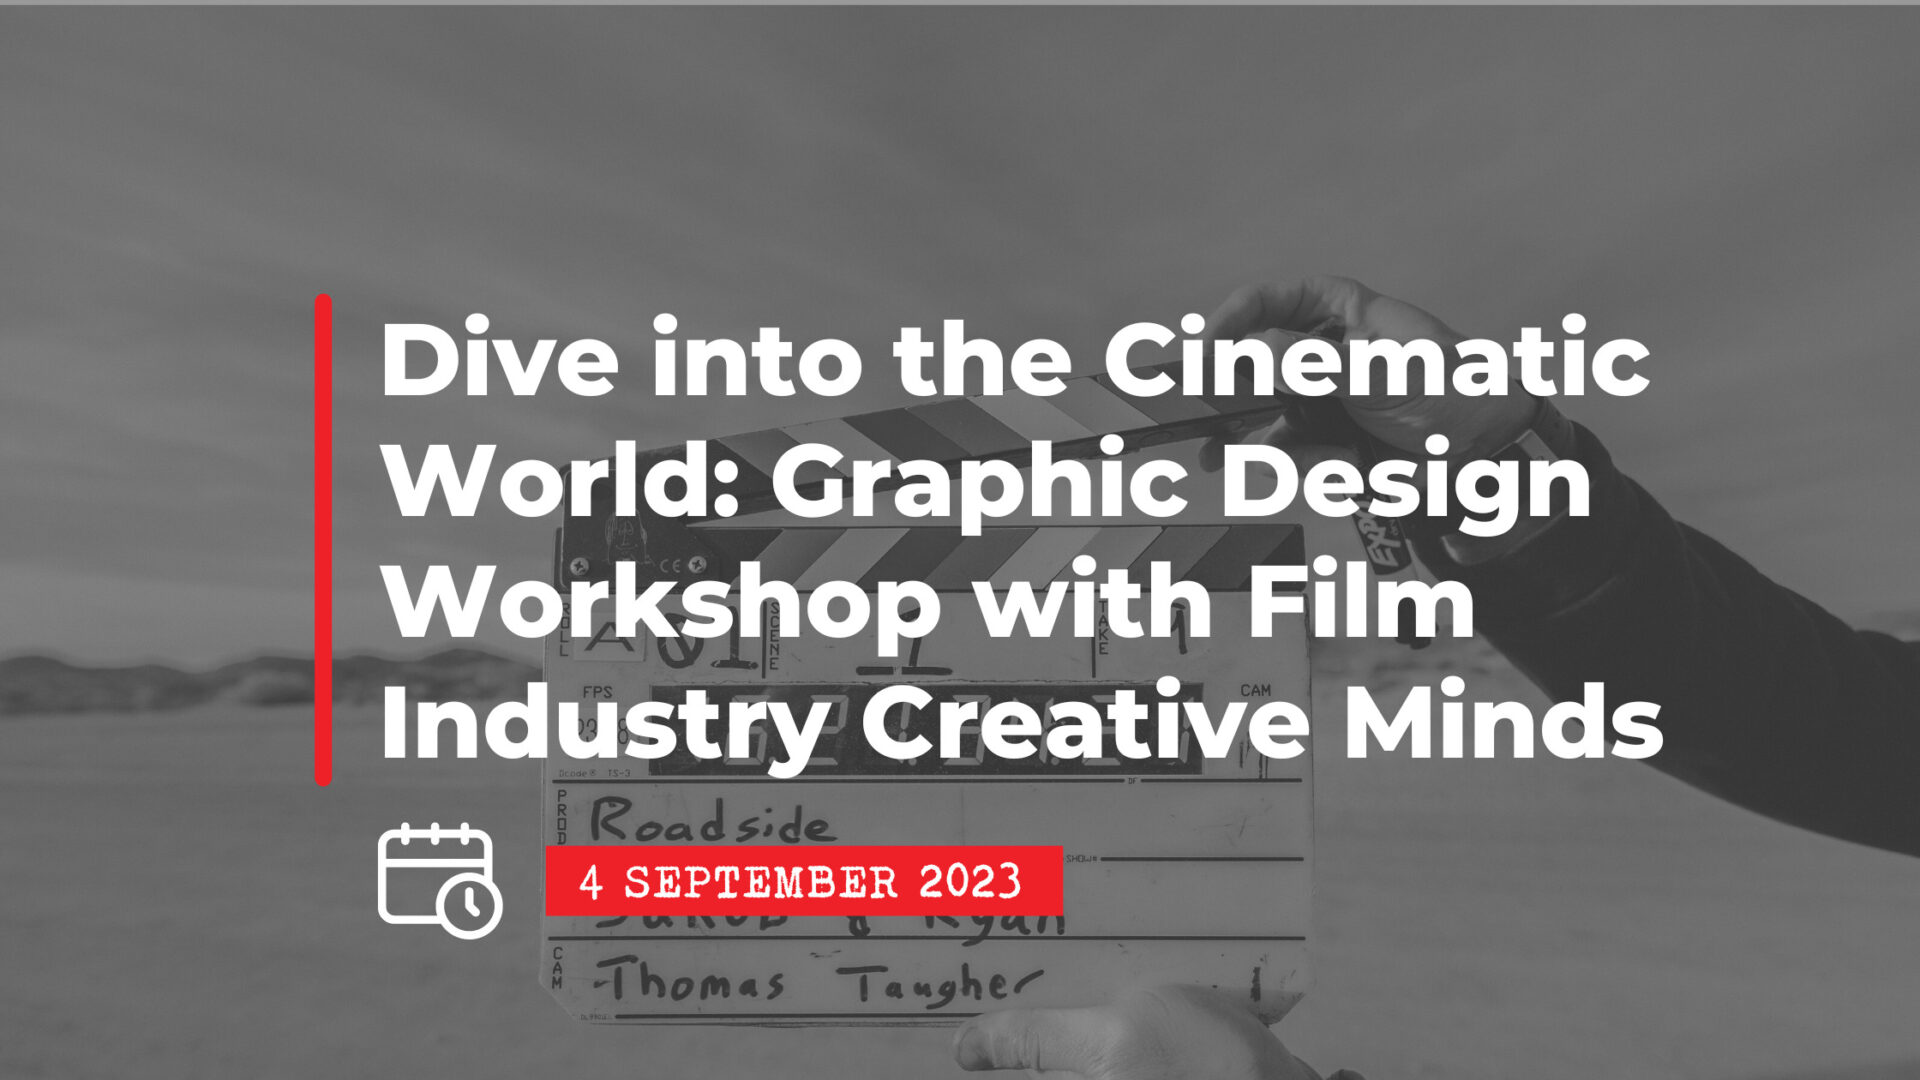 4 September 2023: Dive into the Cinematic World: Graphic Design Workshop with Film Industry Creative Minds